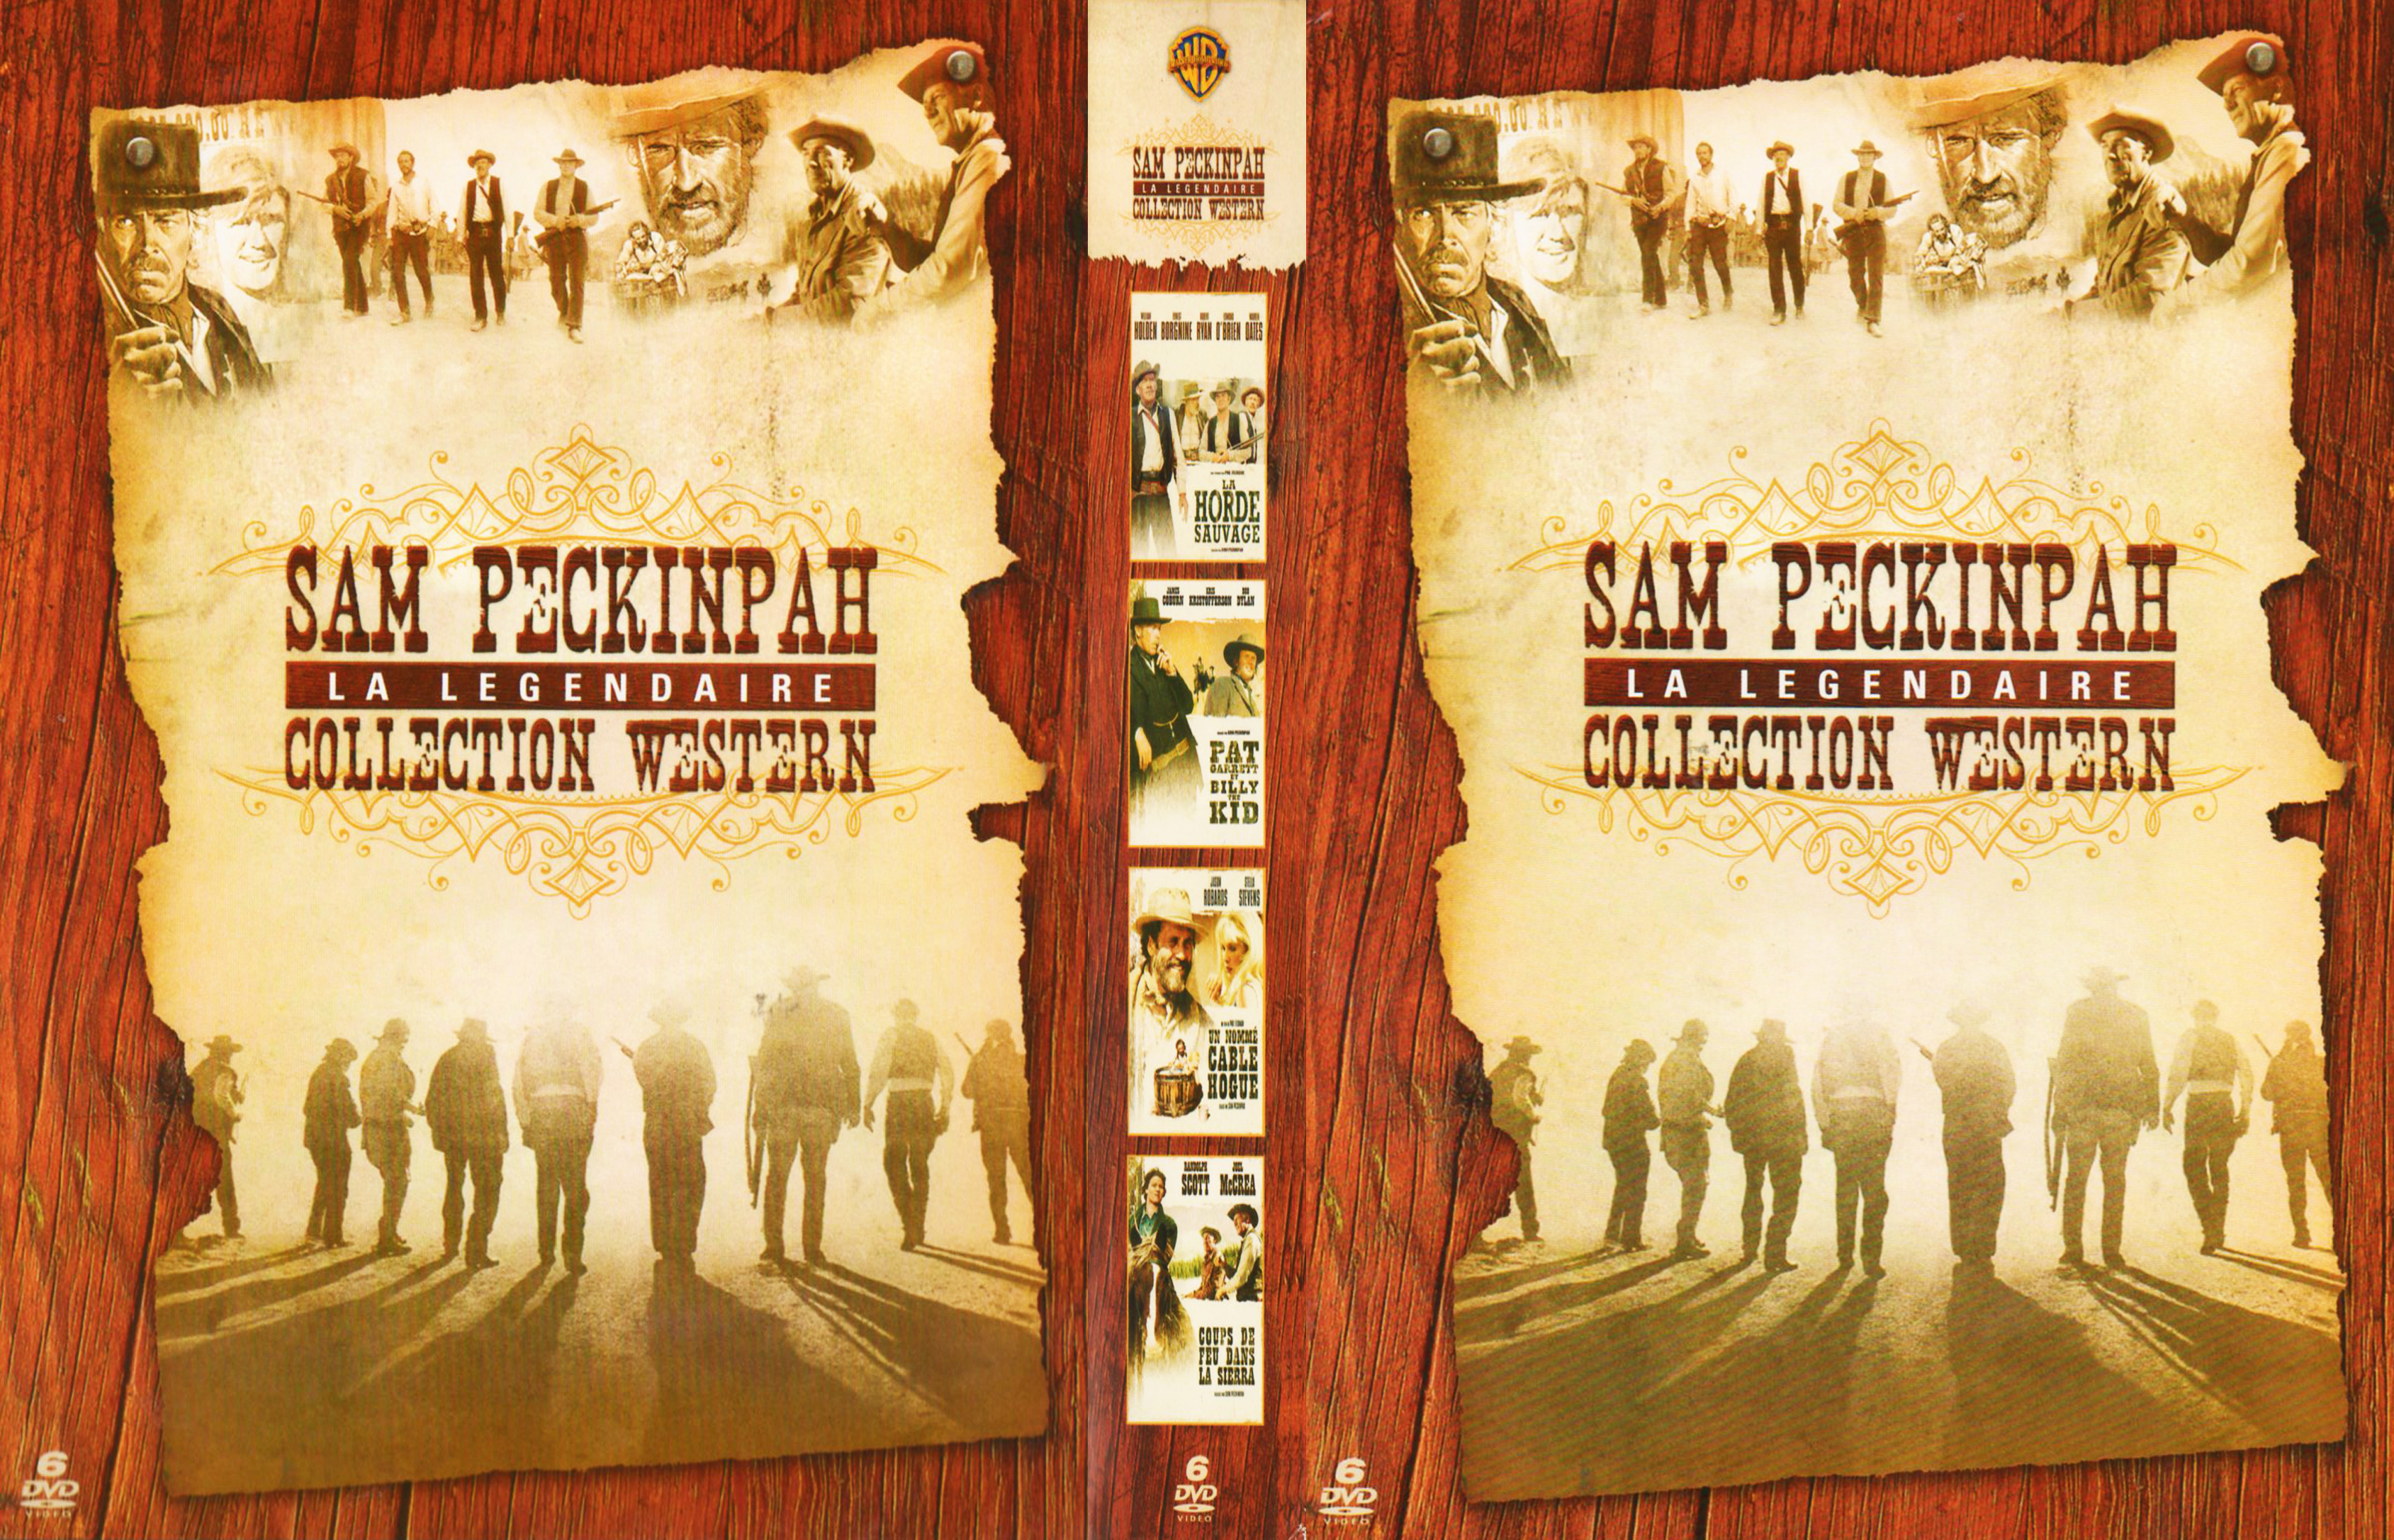 Jaquette DVD Sam Peckinpah collection western